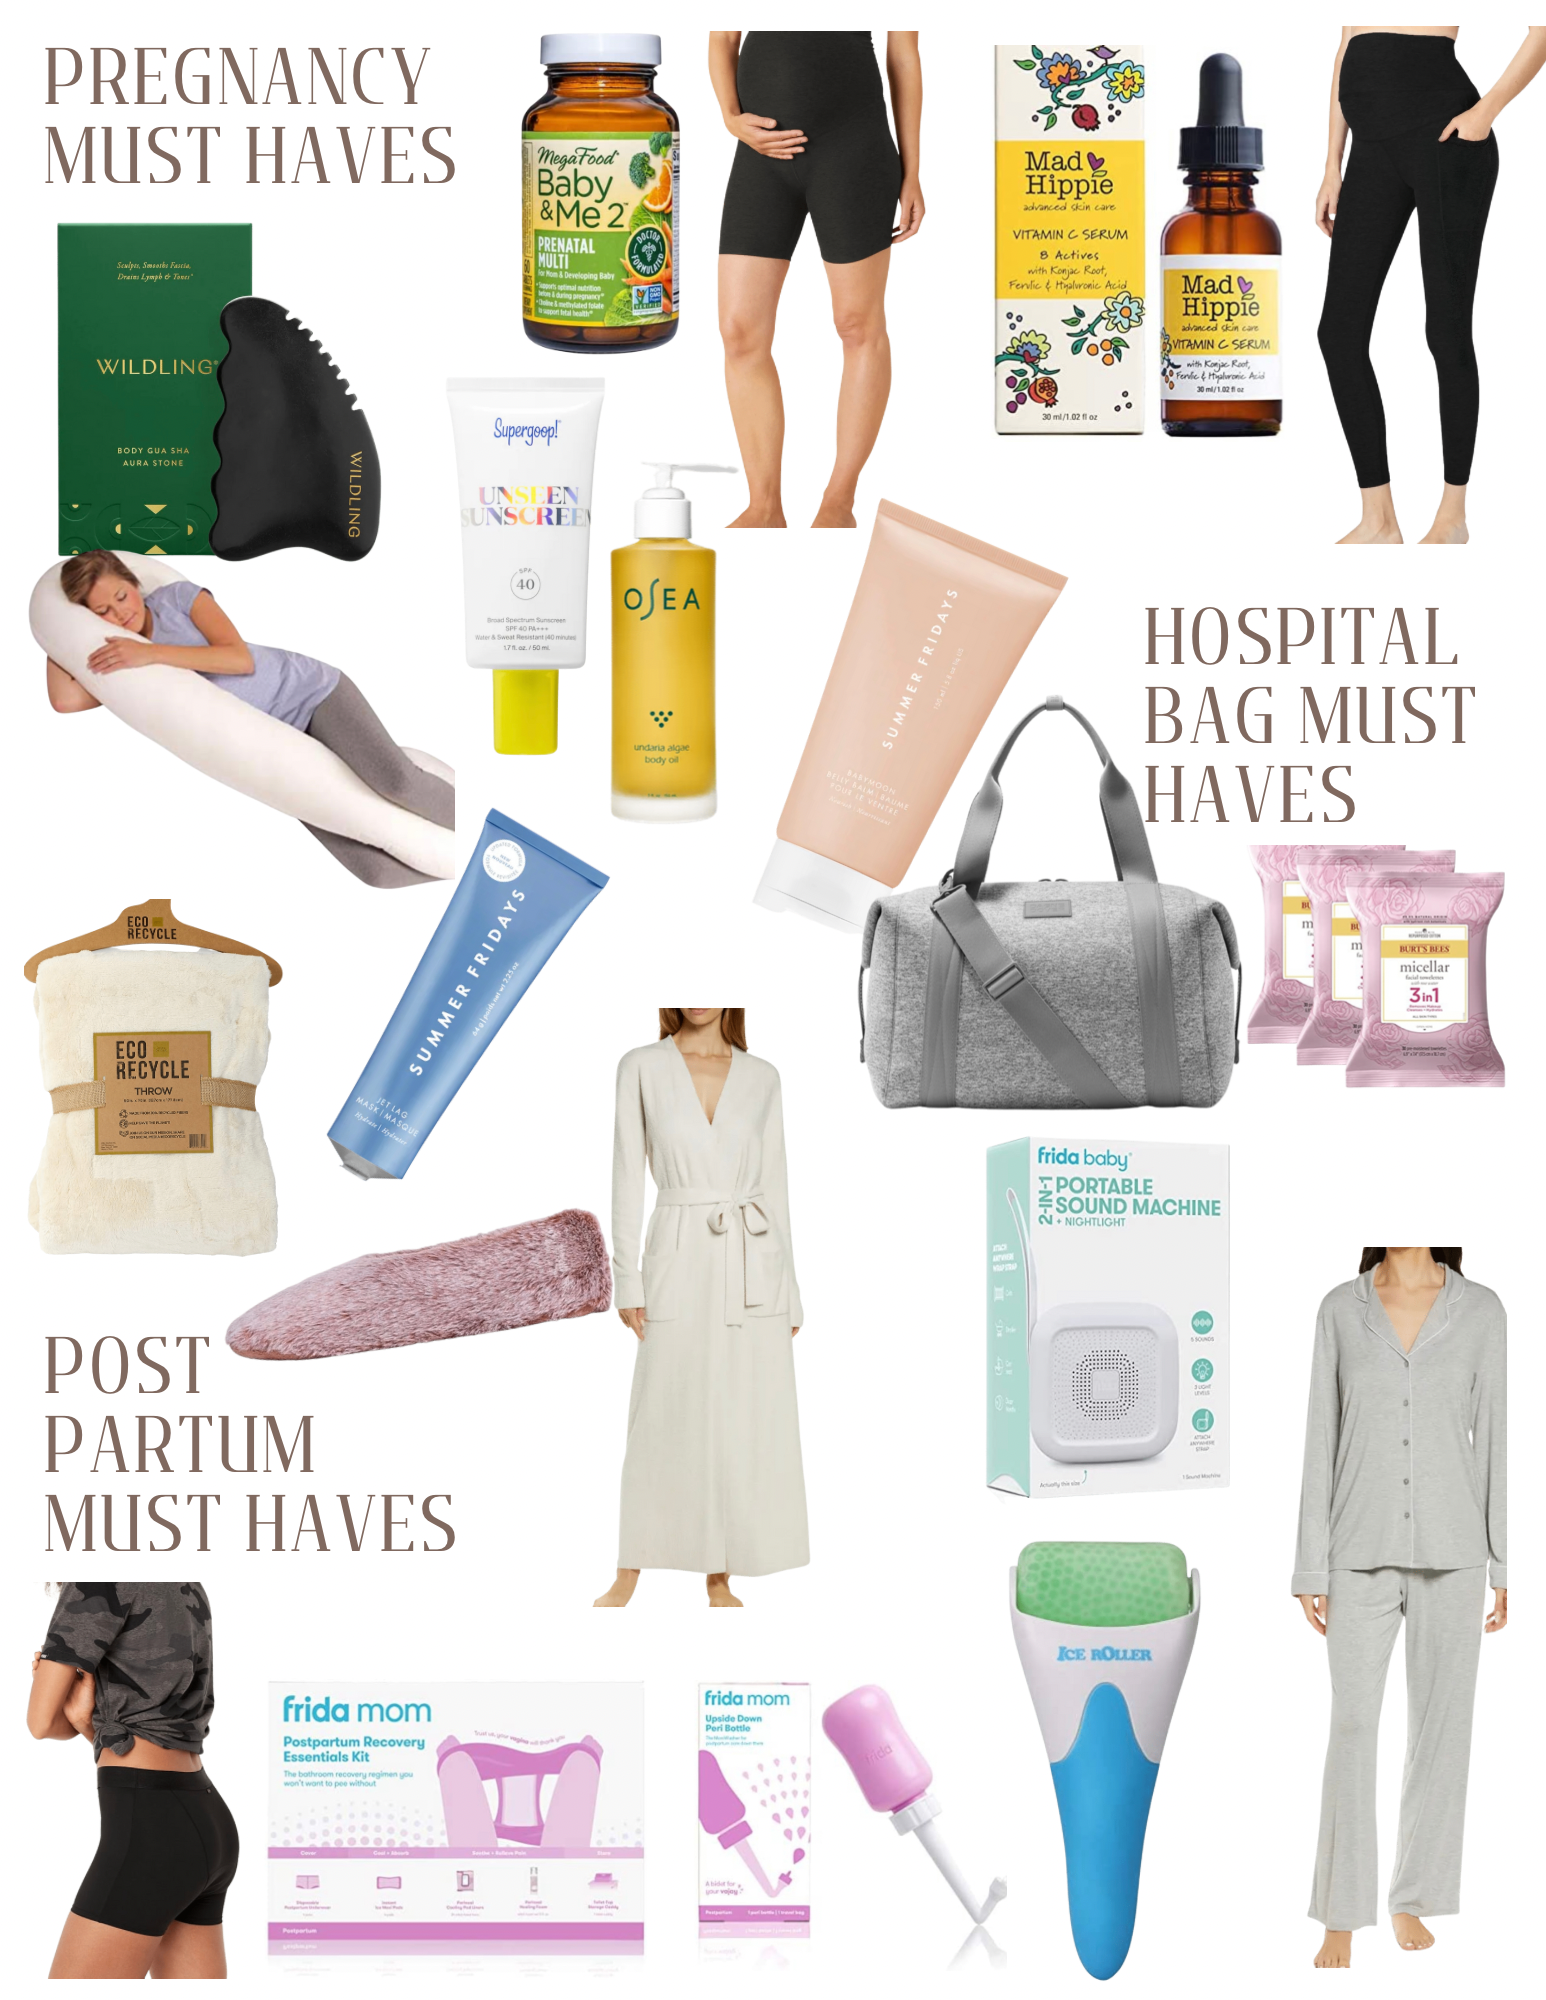 Pregnancy, Hospital Bag & Postpartum Must Haves — Live Well by Kimmy